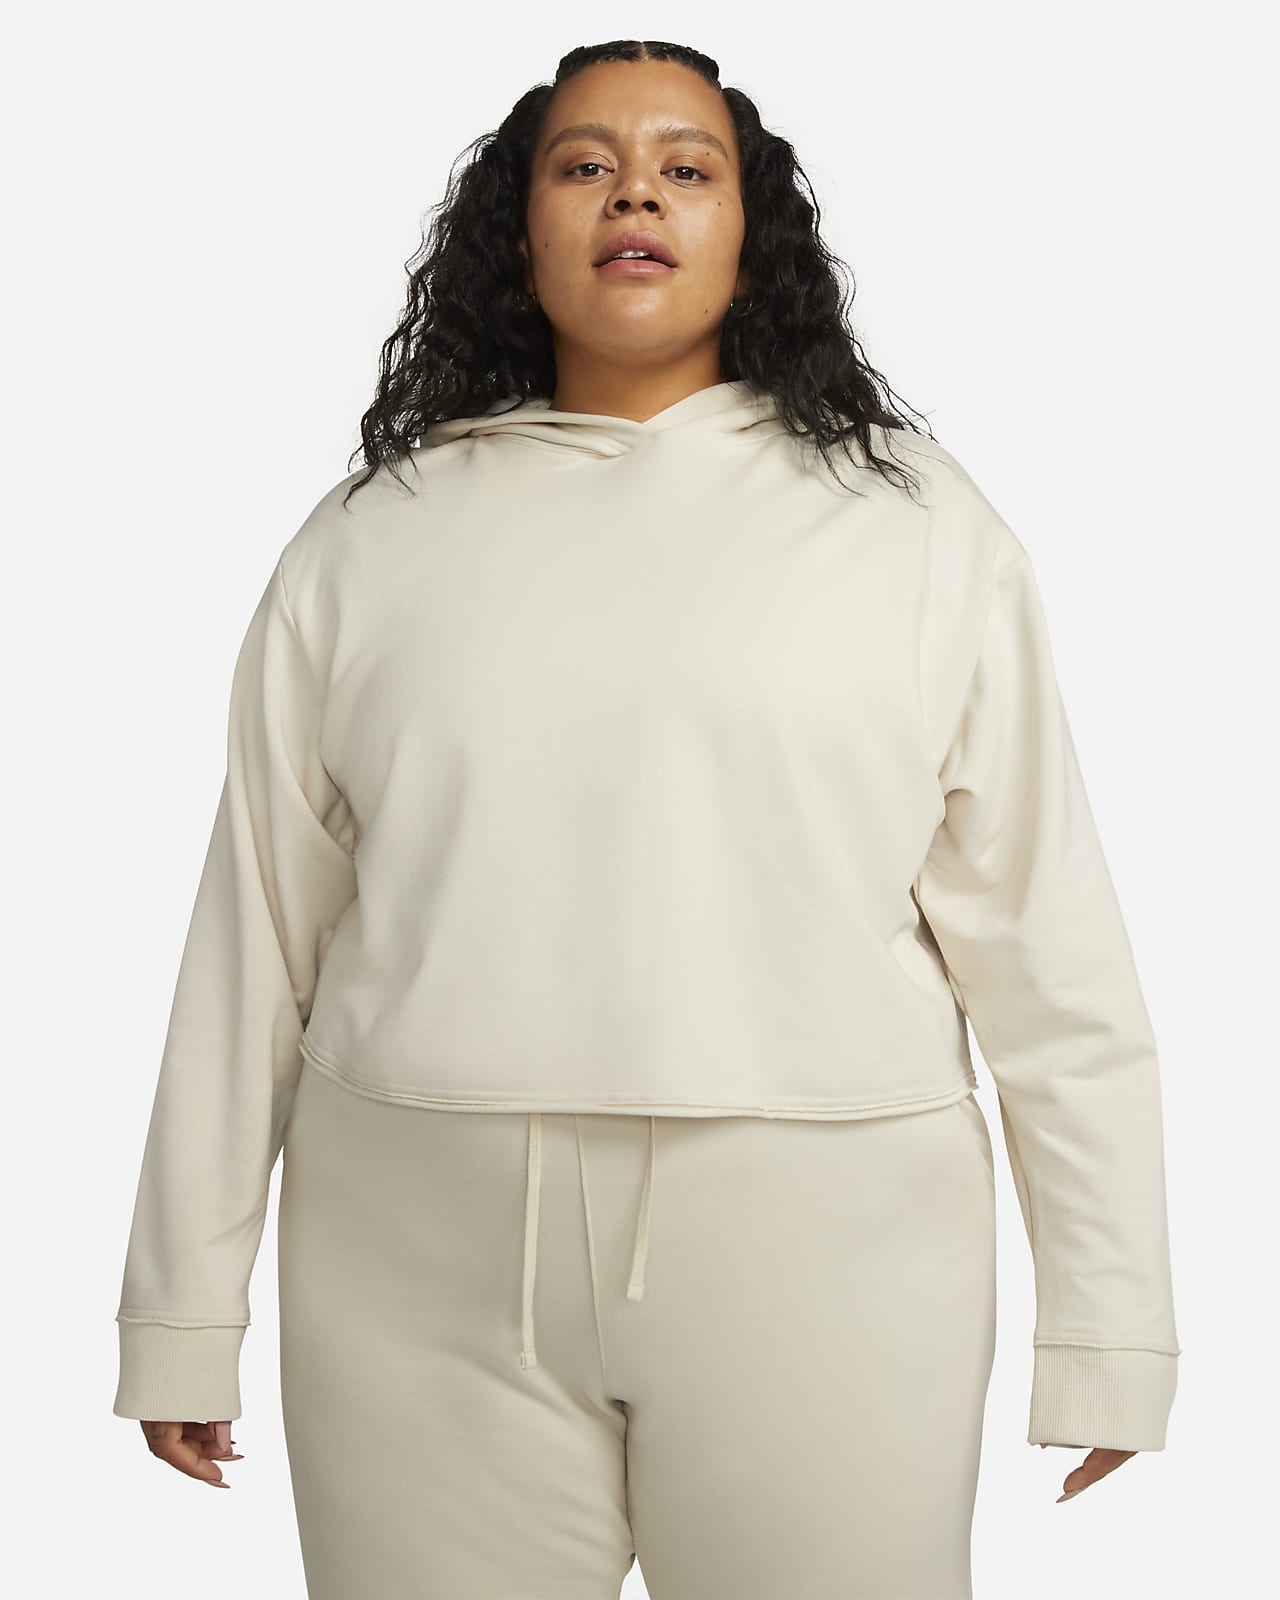 Nike Yoga luxe cropped hoodie in gray